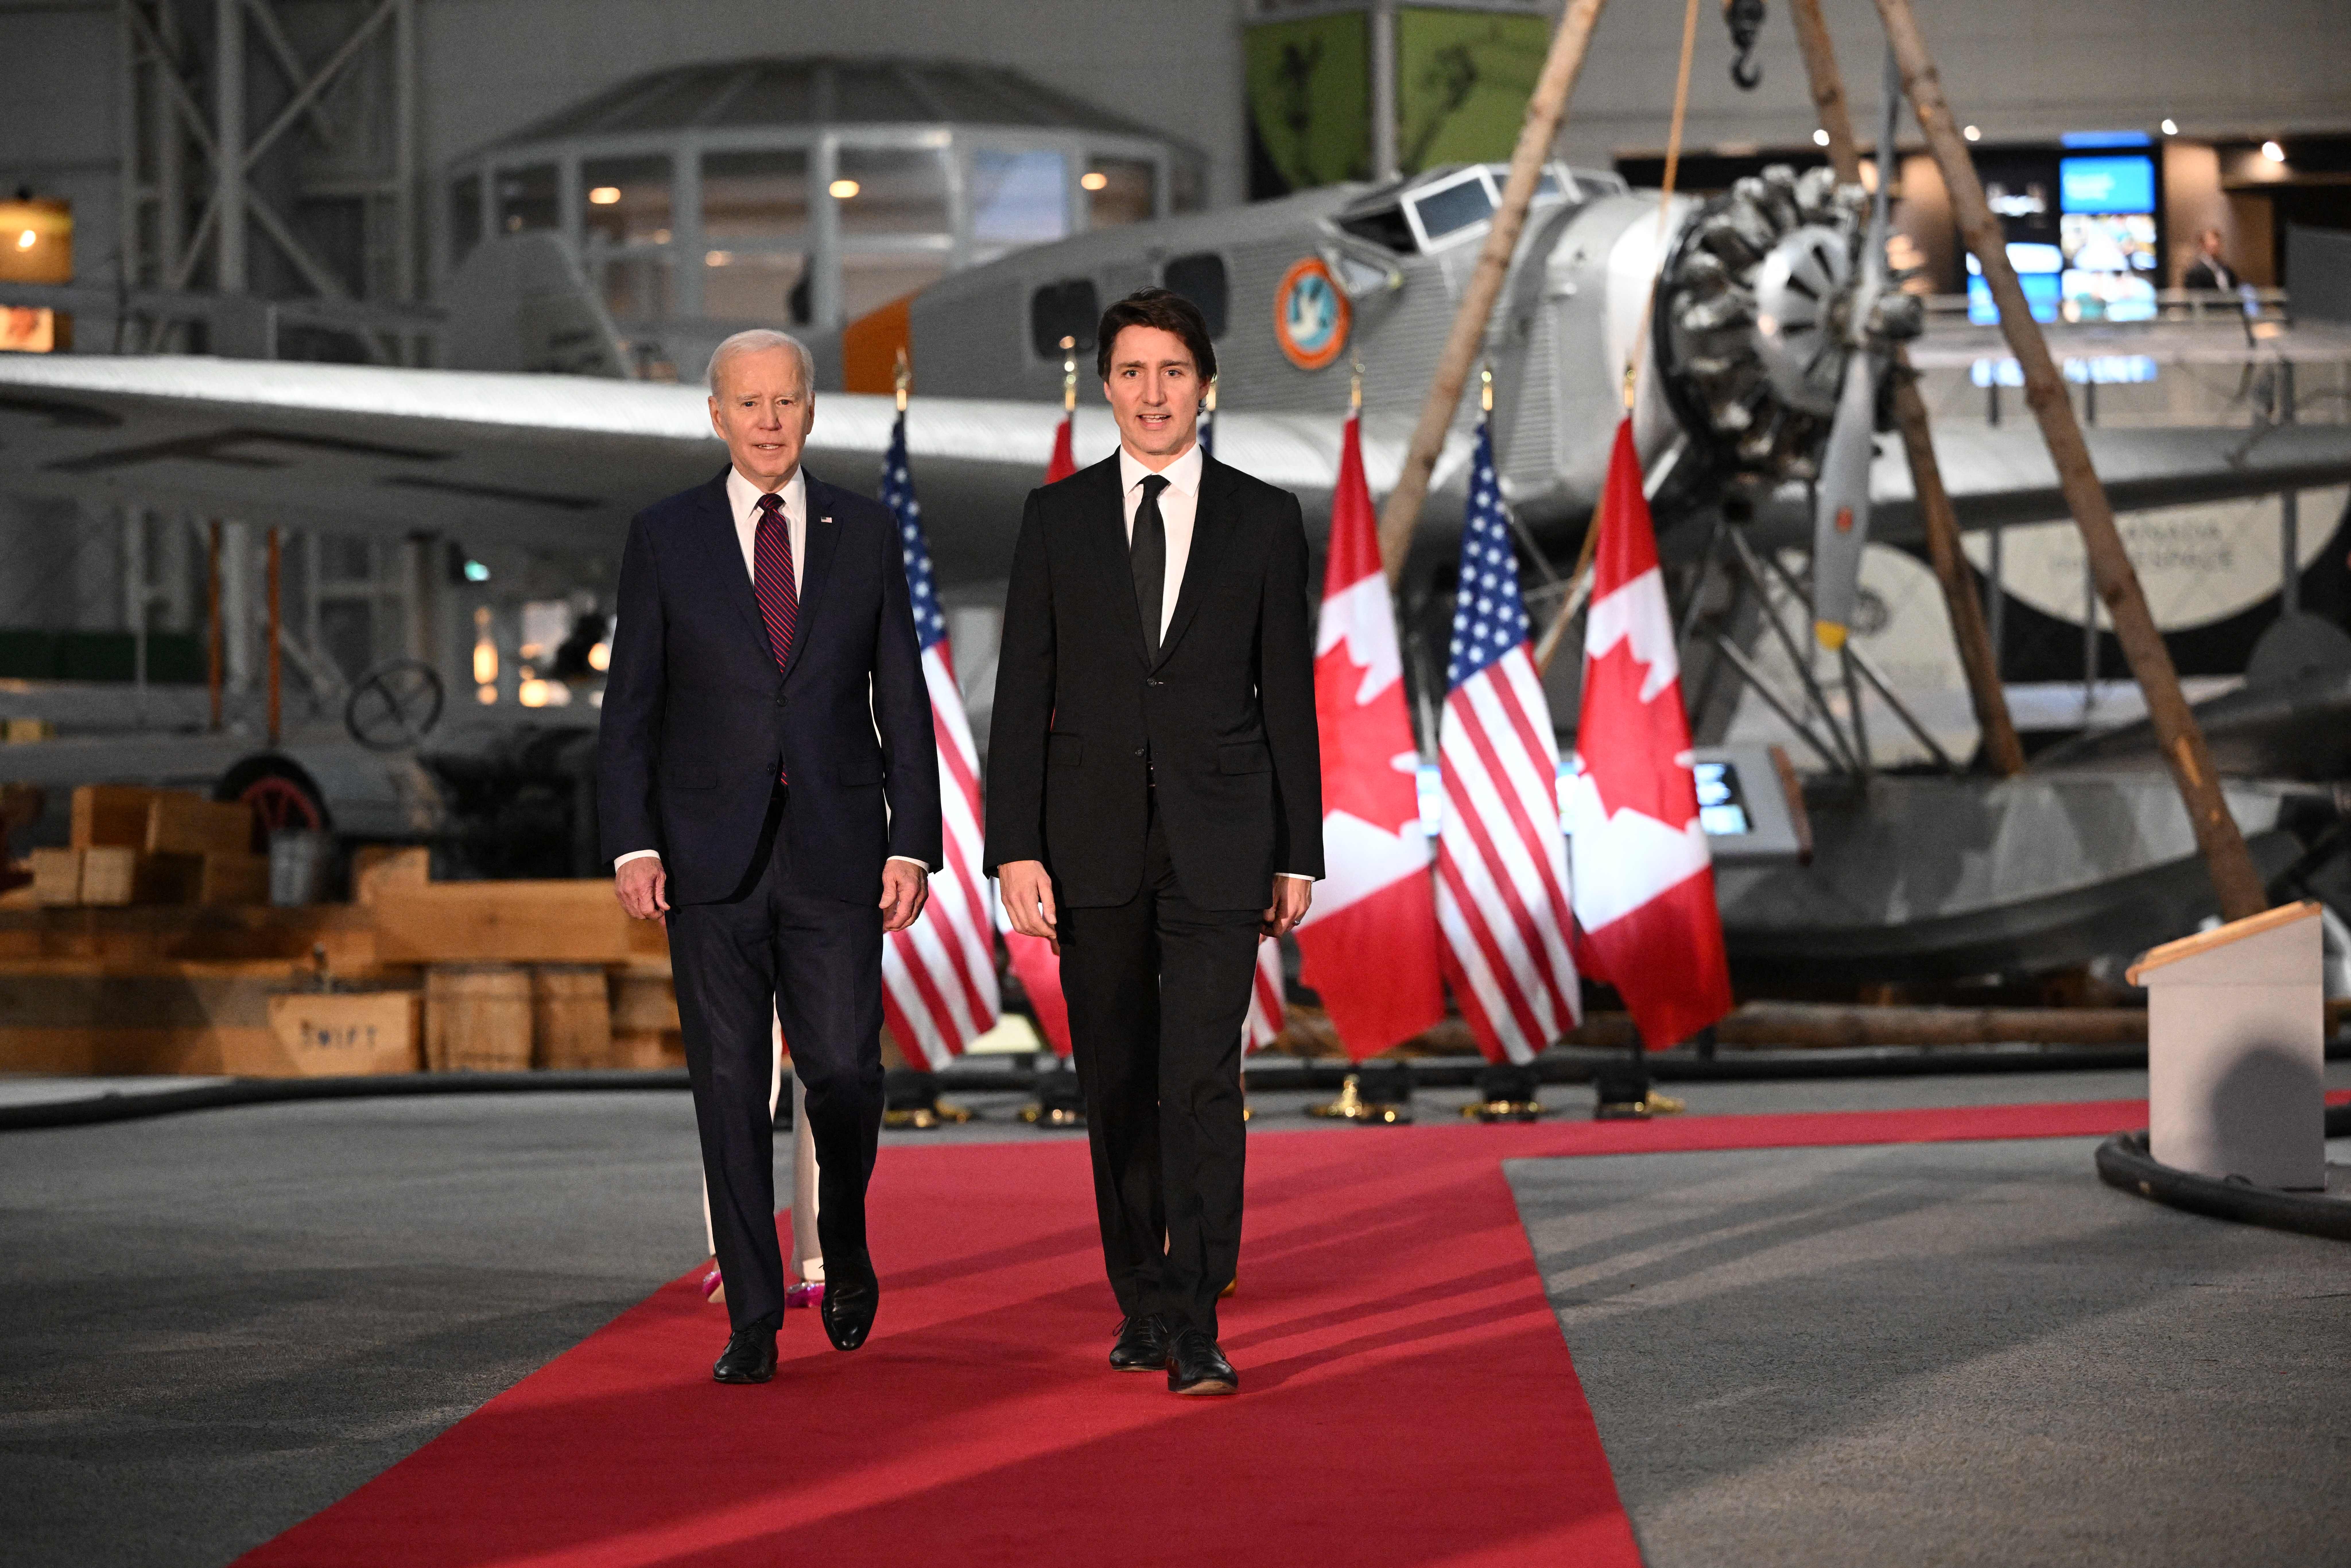 US President Joe Biden and Canada's Prime Minister Justin Trudeau arrive to attend a gala dinner hosted Justin Trudeau and his wife Sophie Gregoire Trudeau at the Canadian Aviation and Space Museum in Ottawa, Canada, on March 24, 2023. 